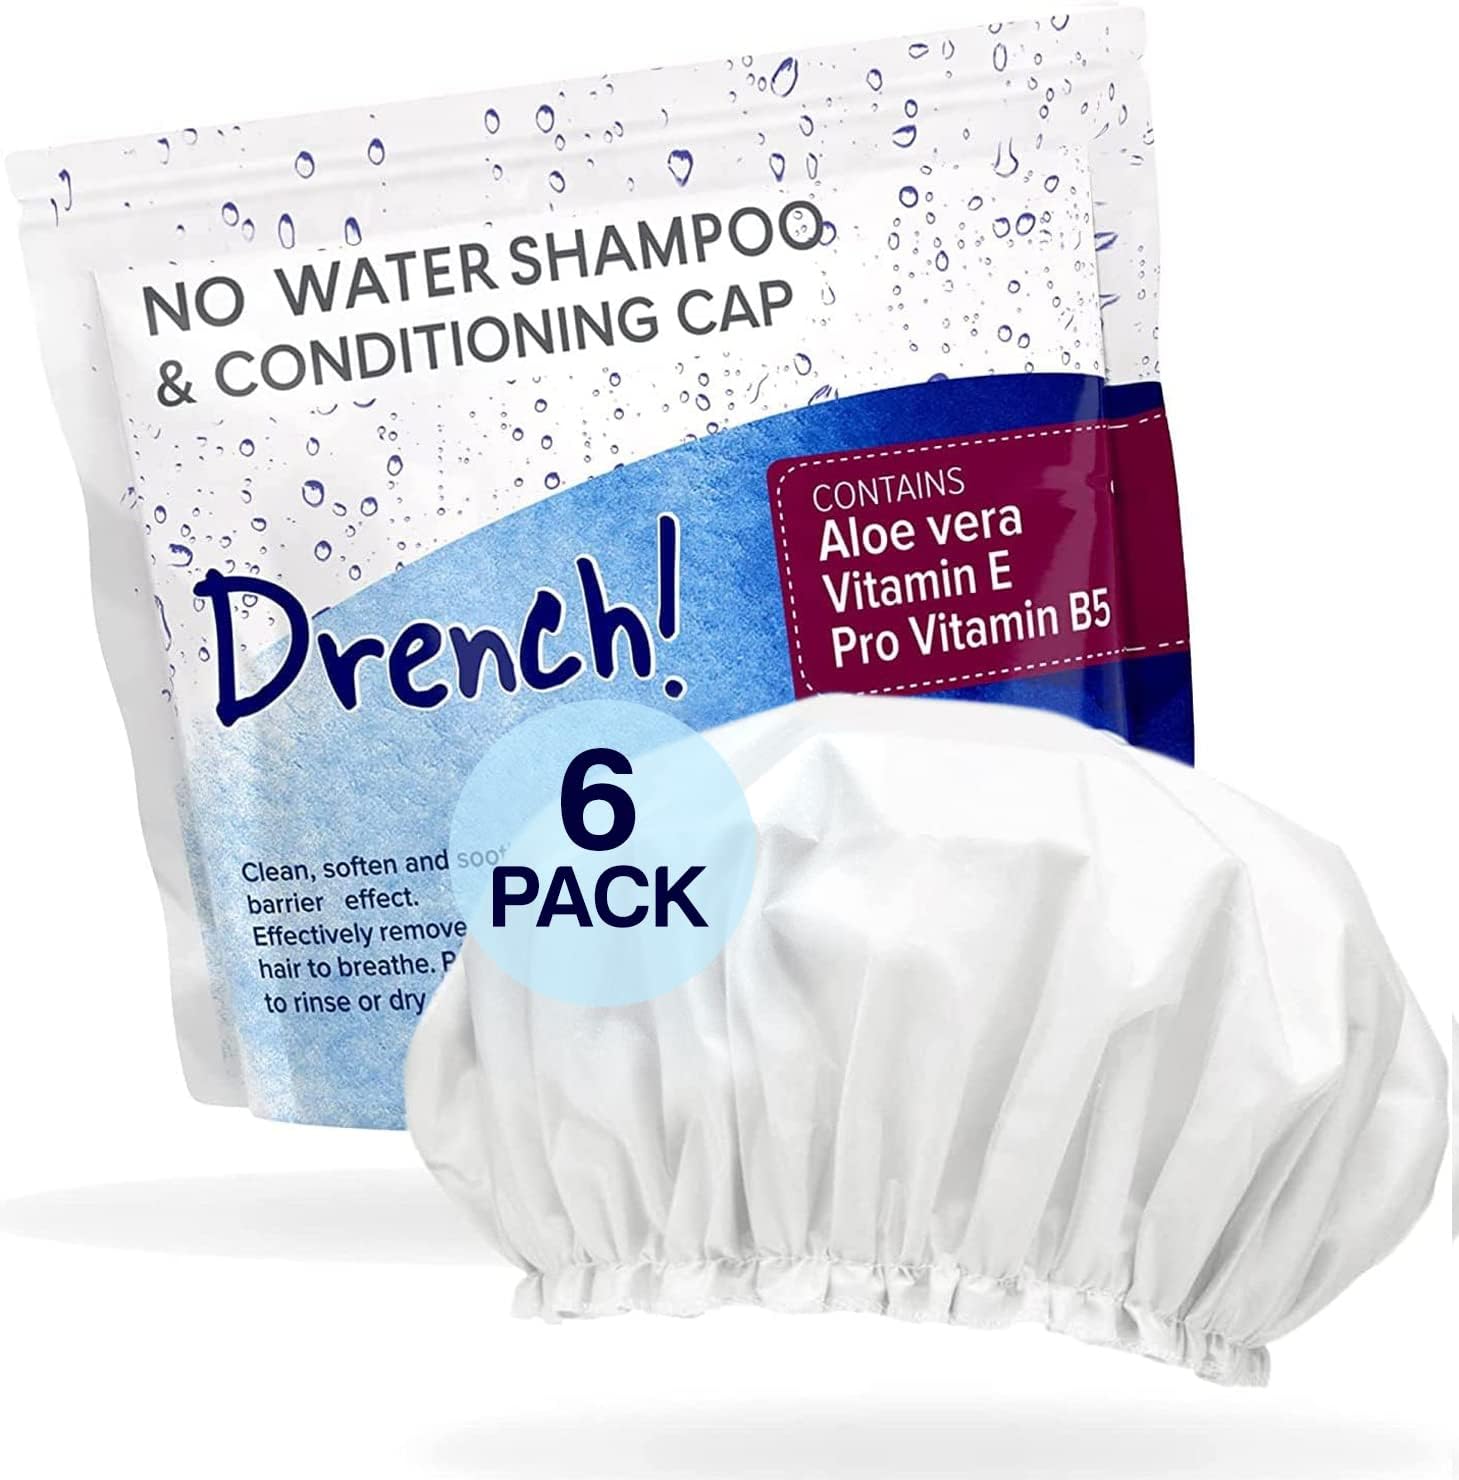 Drench No Water Rinse Free Shampoo Caps [6-Pack] - Waterless Shampoo and Conditioner - Dry Hair Wash Caps for Elderly or Bedridden - Contains Aloe Vera, Vitamin E and Provitamin B5